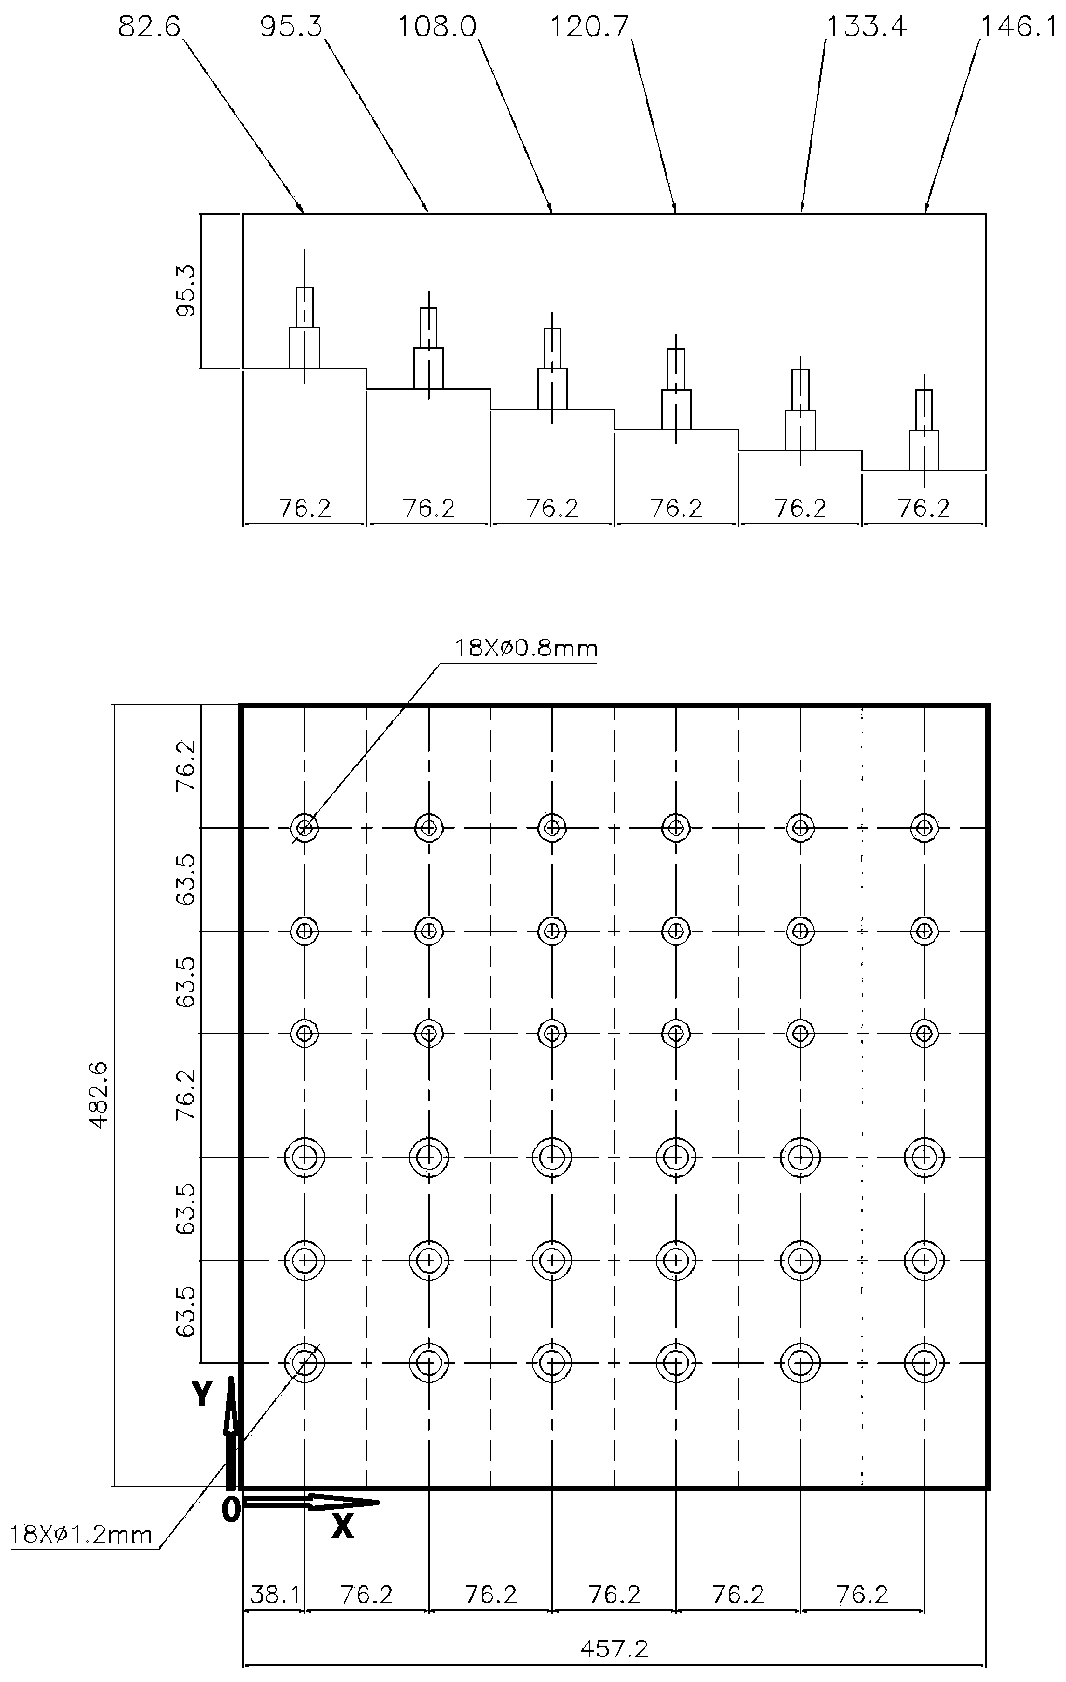 A water immersion phased array ultrasonic testing method for aluminum alloy pre-stretched plates